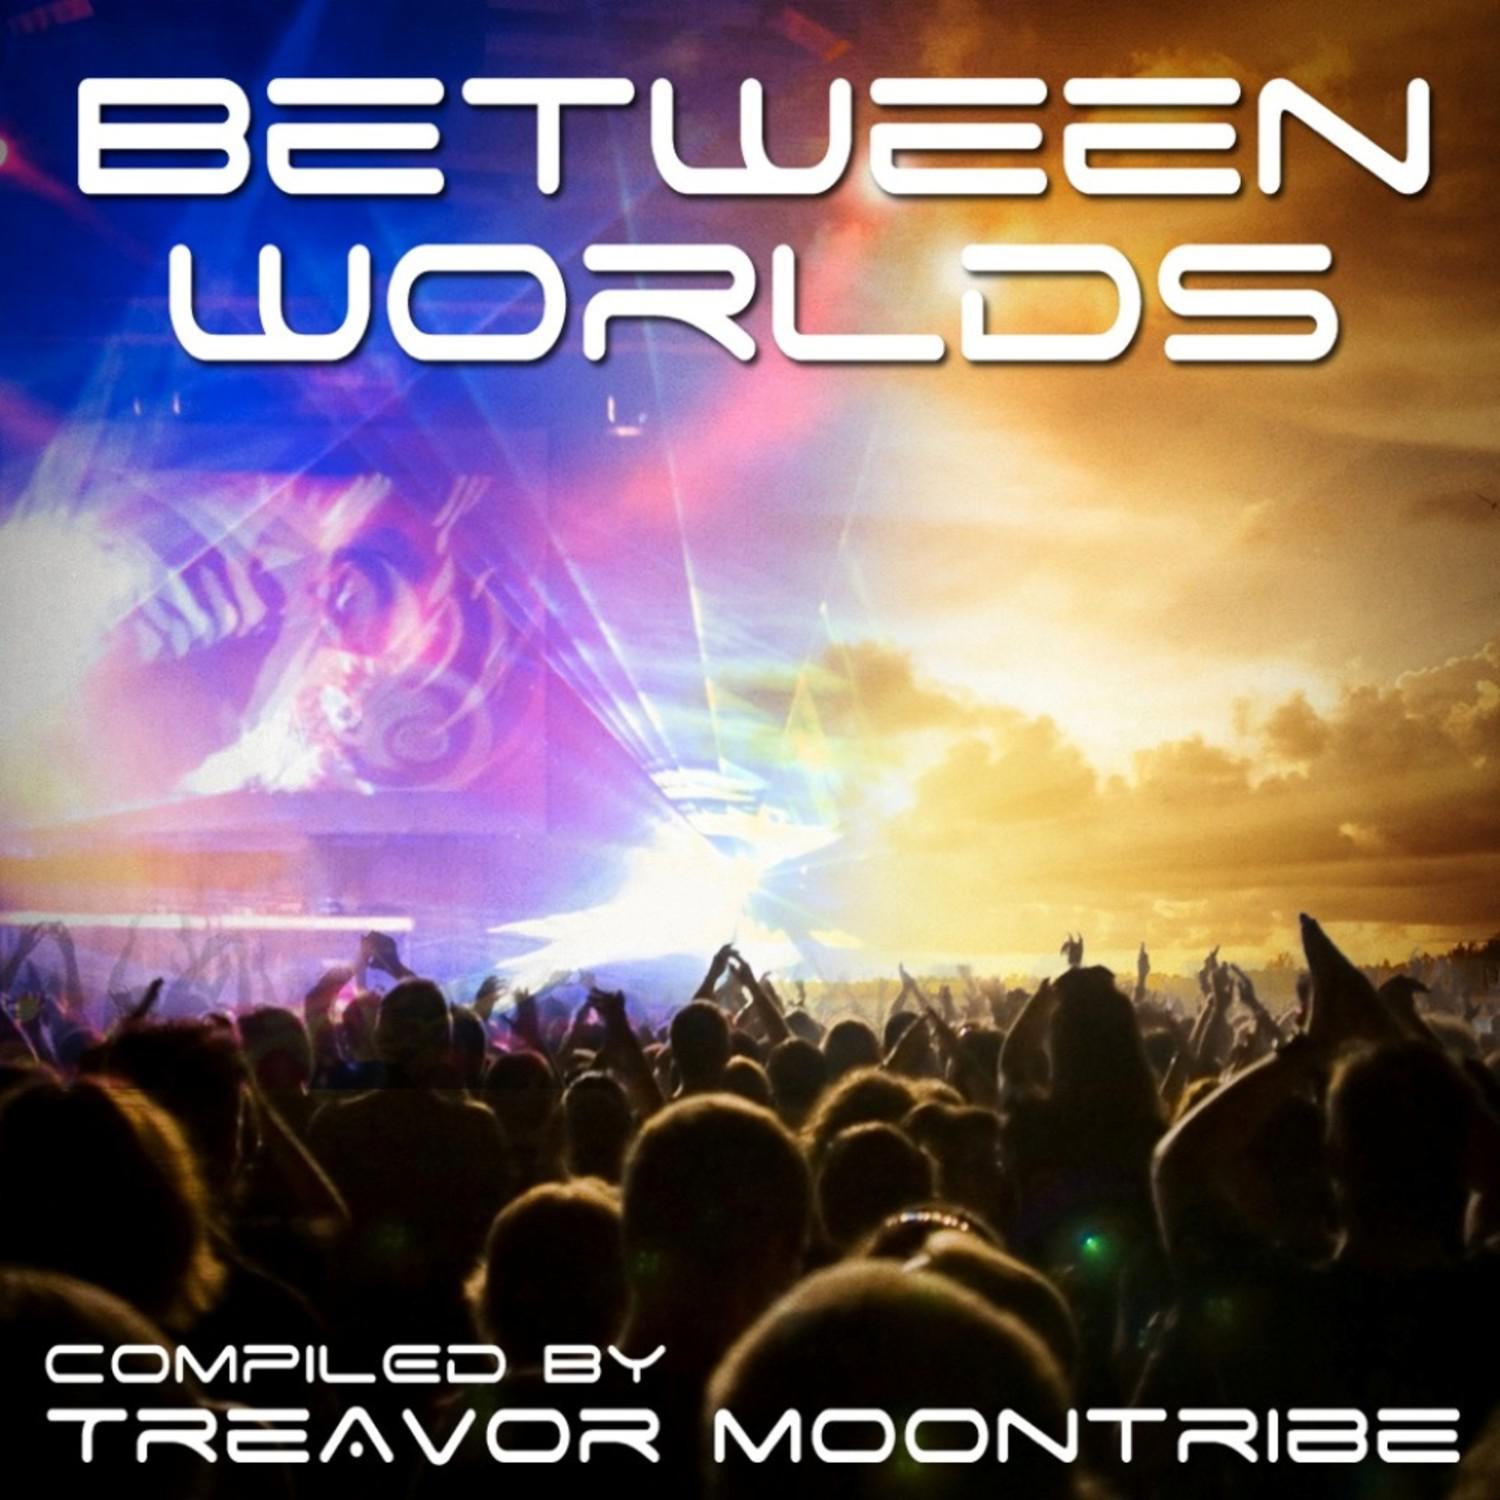 Between Worlds - Compiled By Treavor Moontribe